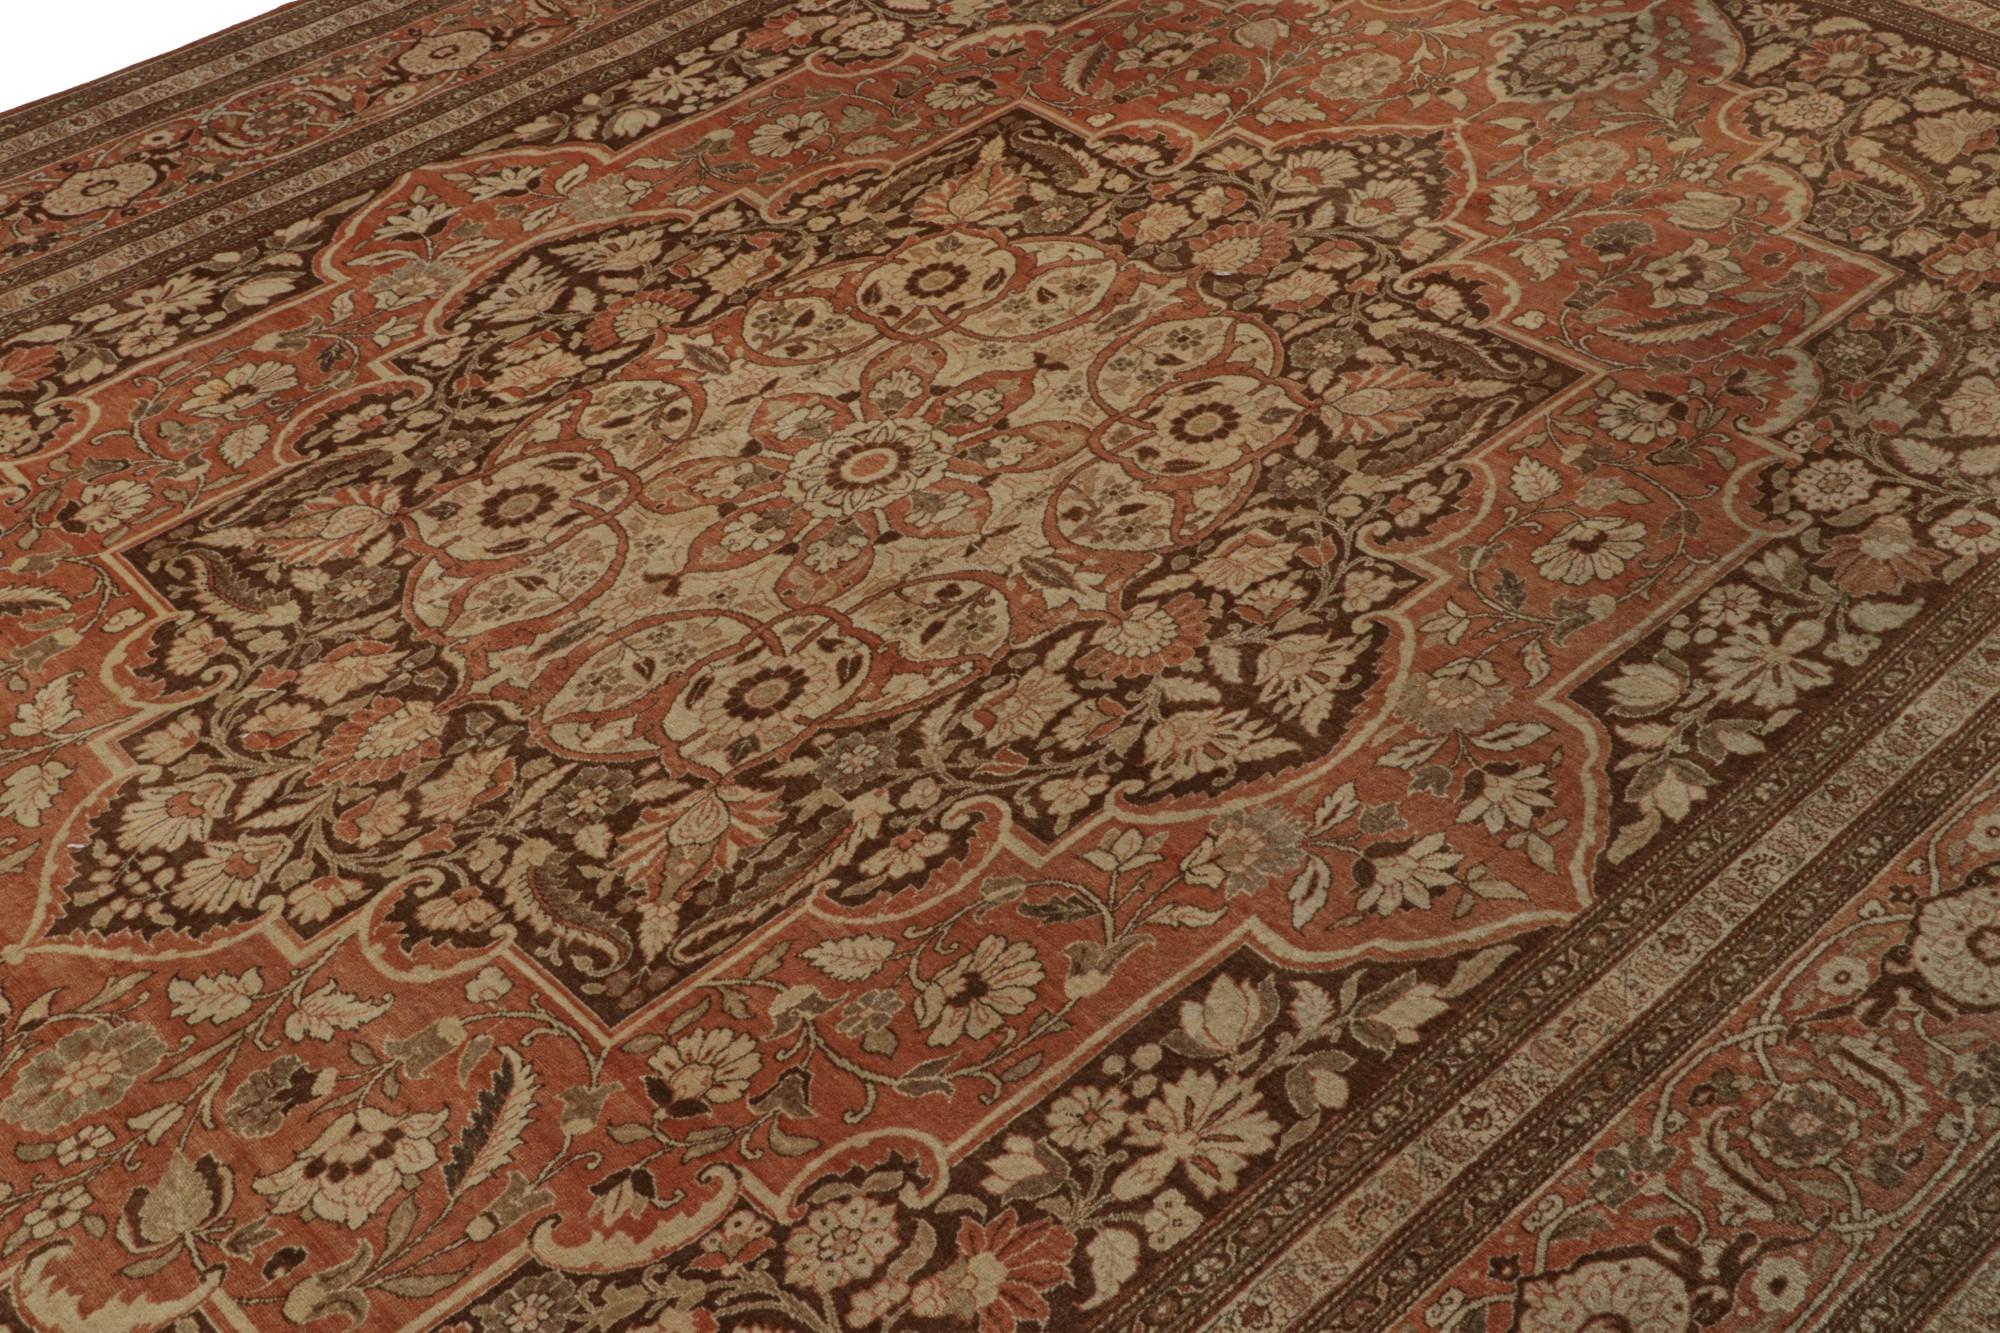 Antique Persian Tabriz Rug, with Floral Patterns, from Rug & Kilim In Good Condition For Sale In Long Island City, NY